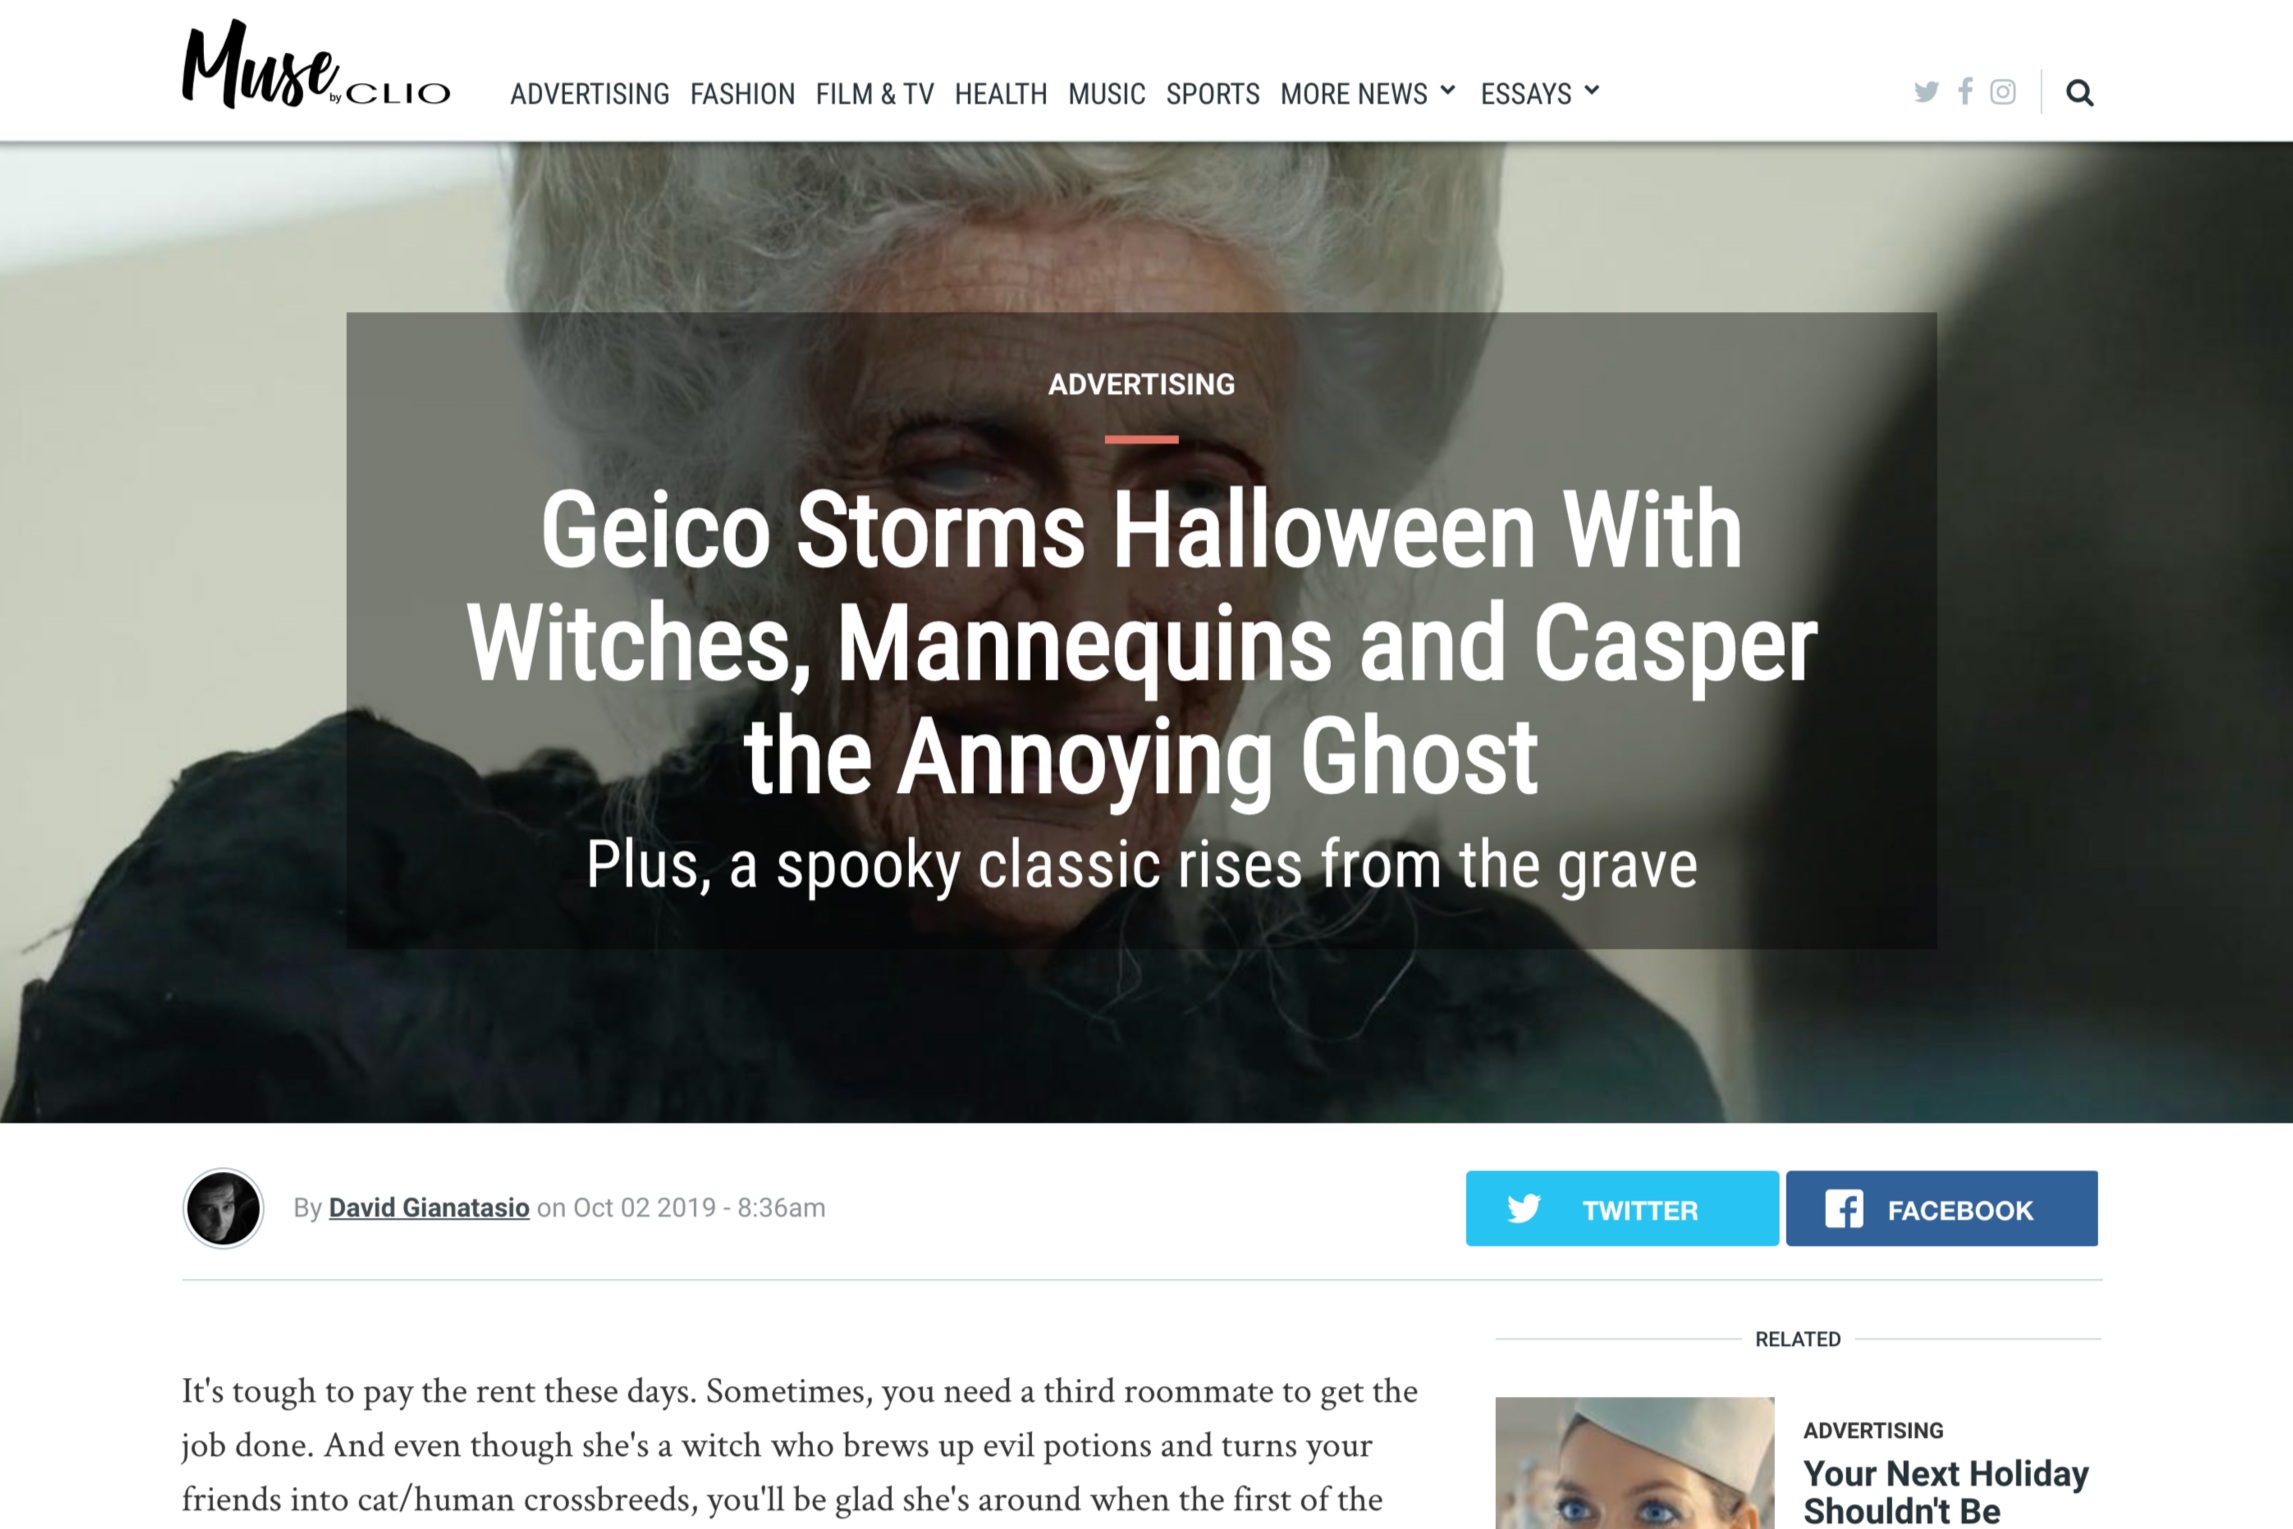 Geico Storms Halloween With Witches, Mannequins and Casper the Annoying Ghost